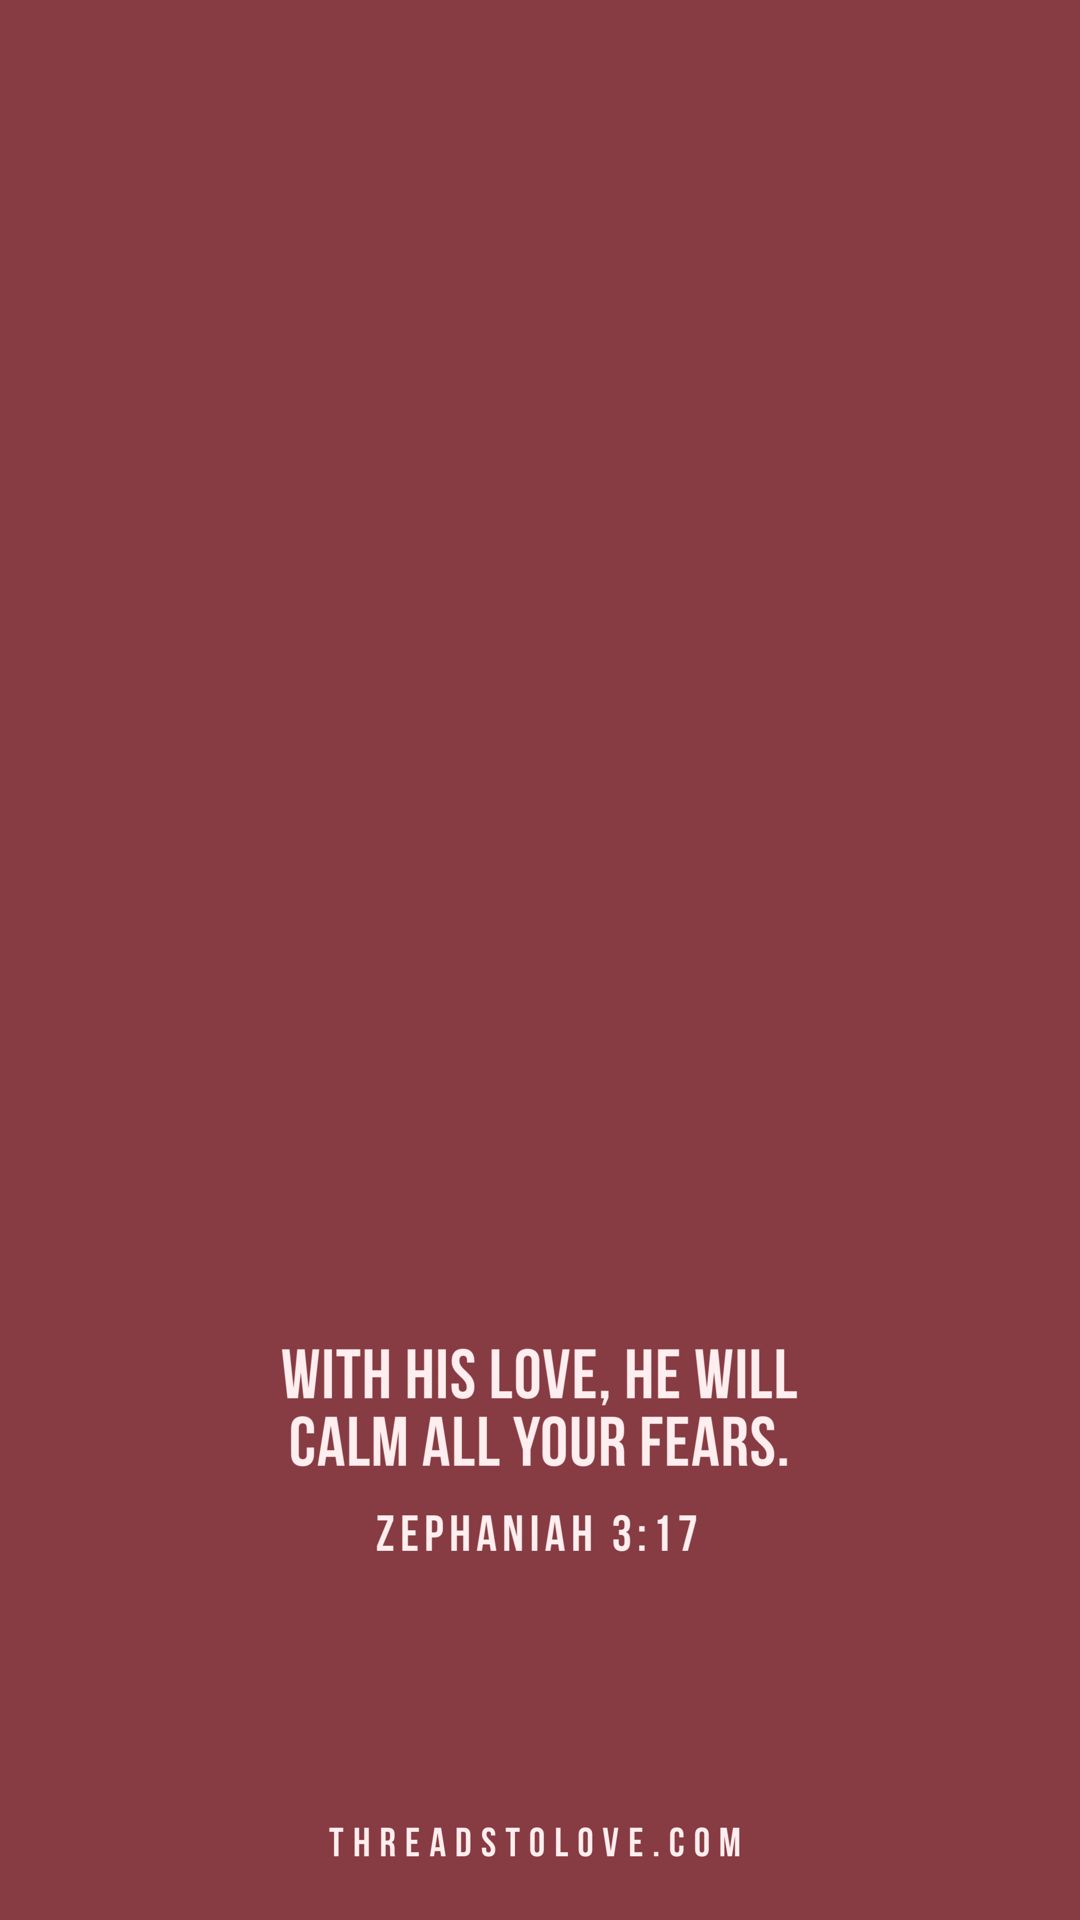 bible verse wallpaper,text,red,font,maroon,pink